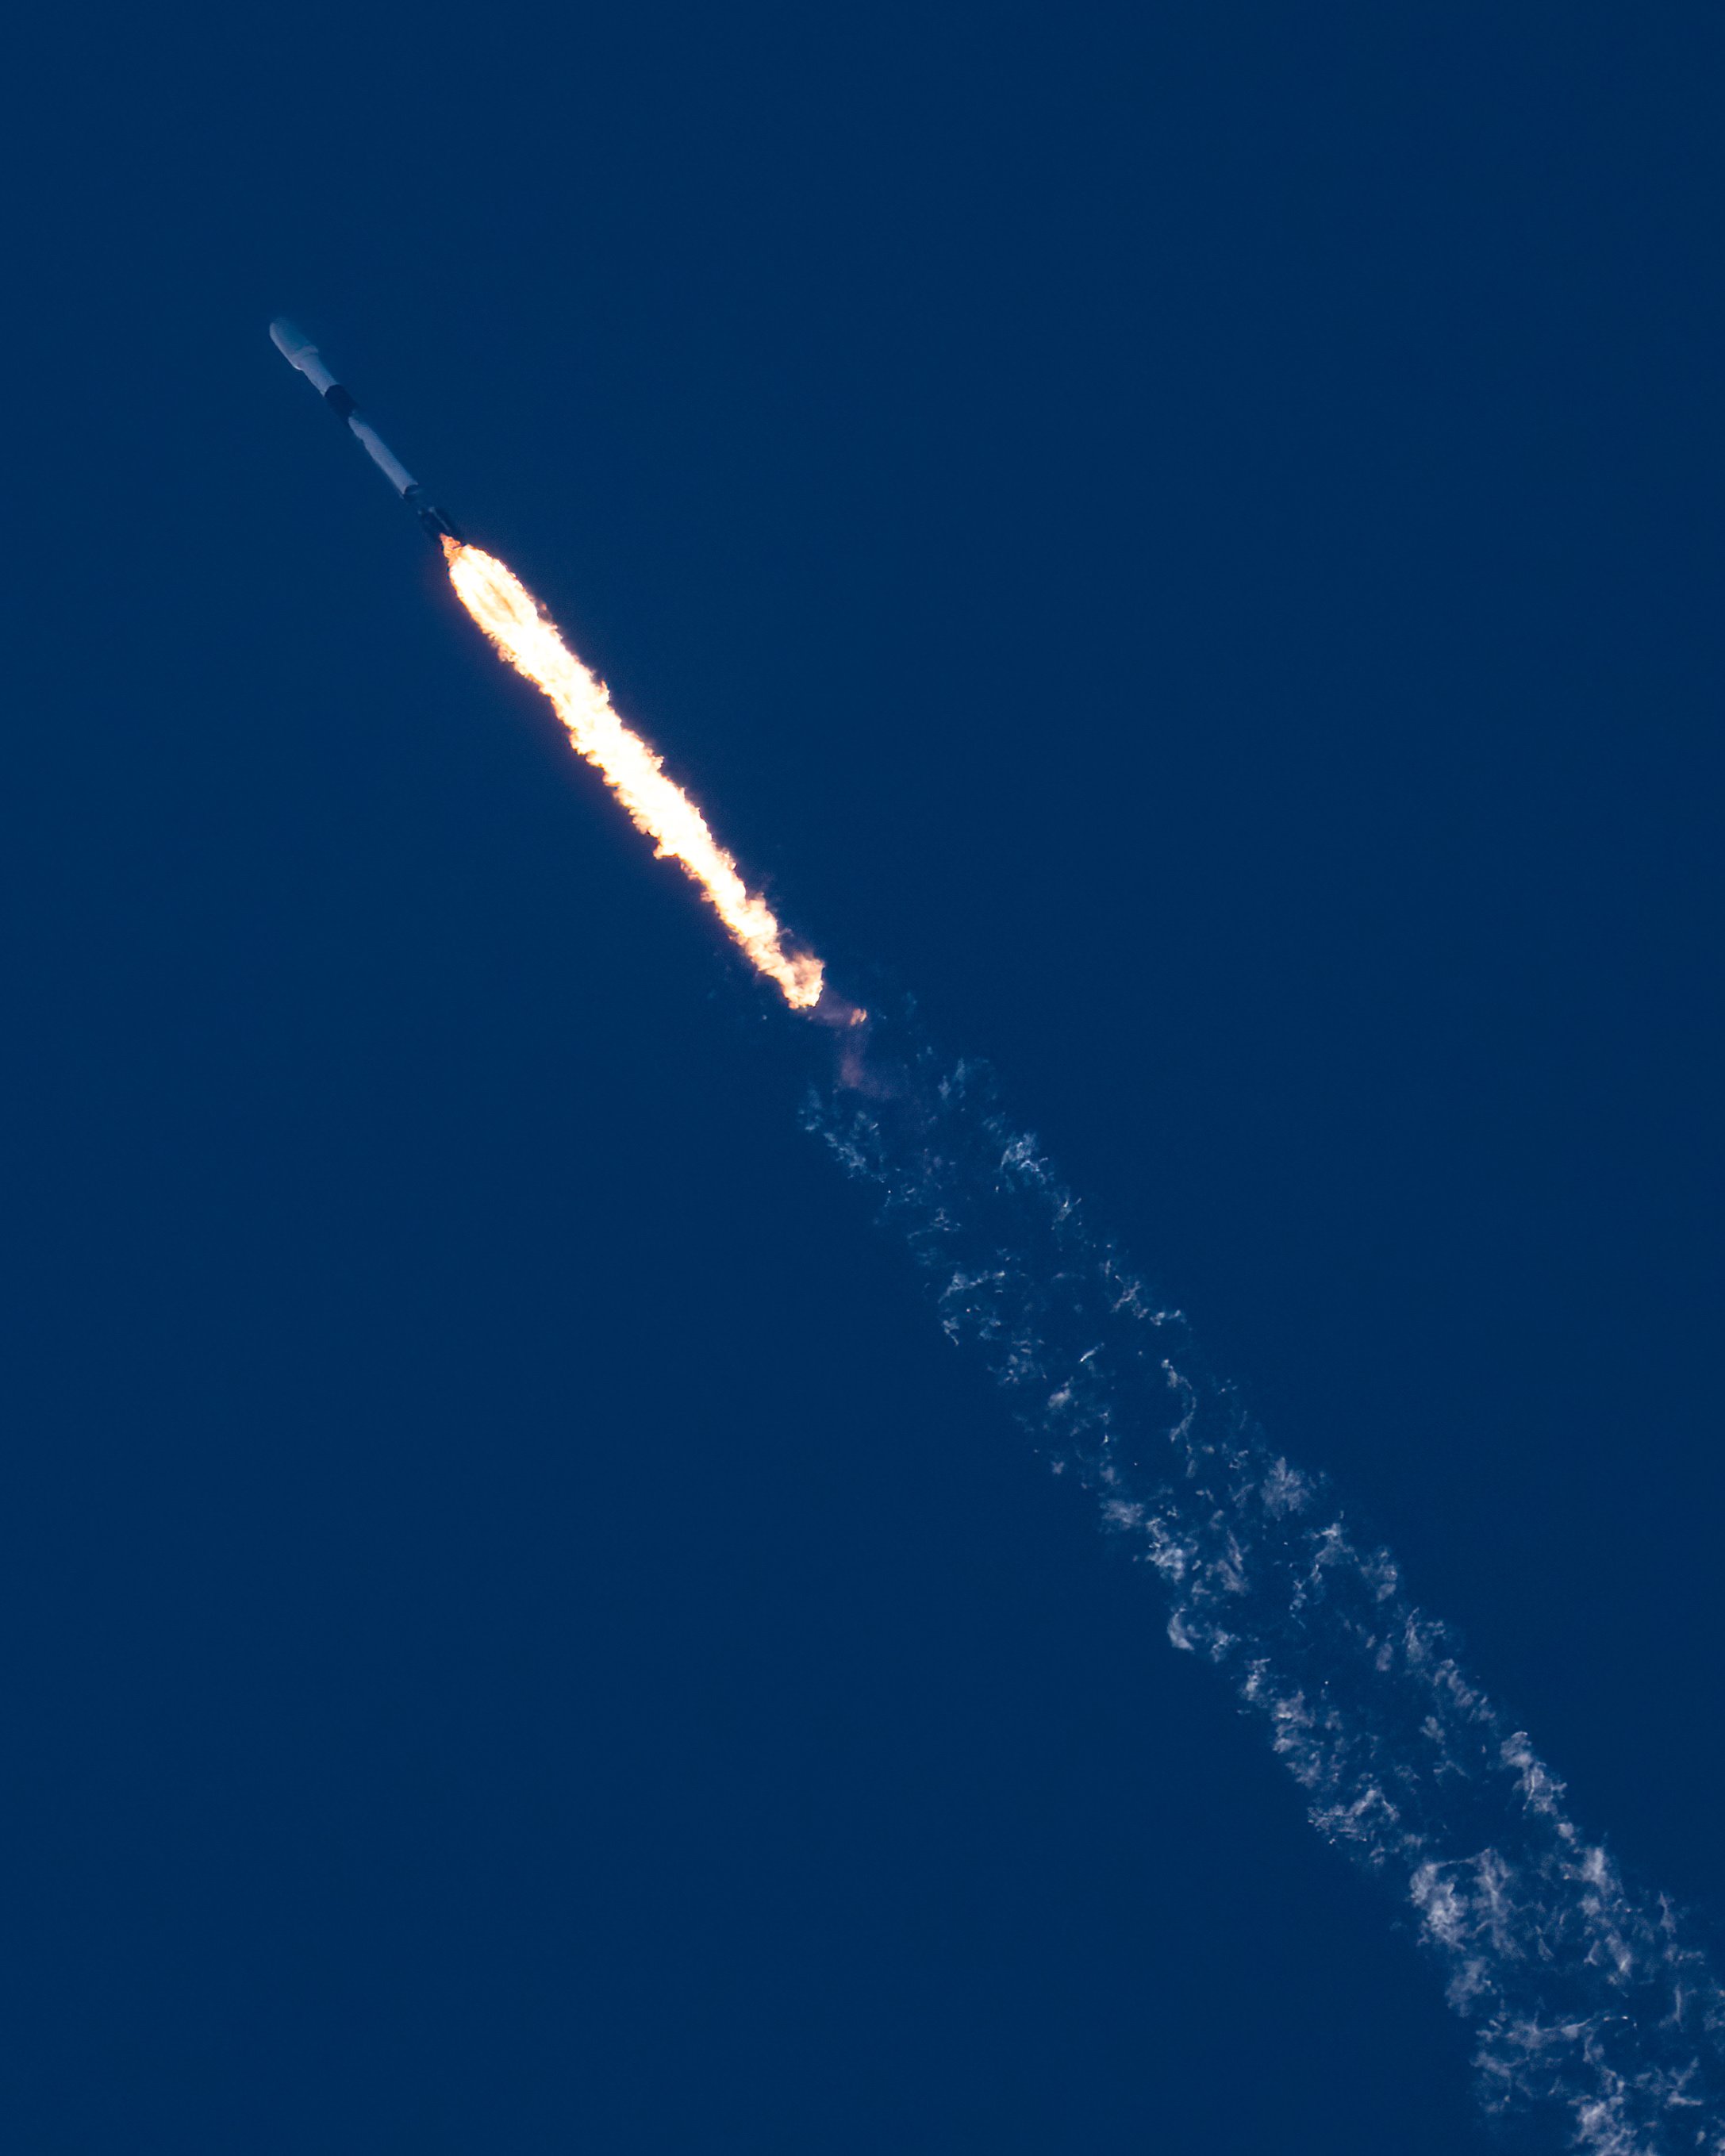 SpaceX Falcon 9 launching Starlink sats from Vandenberg, 2022